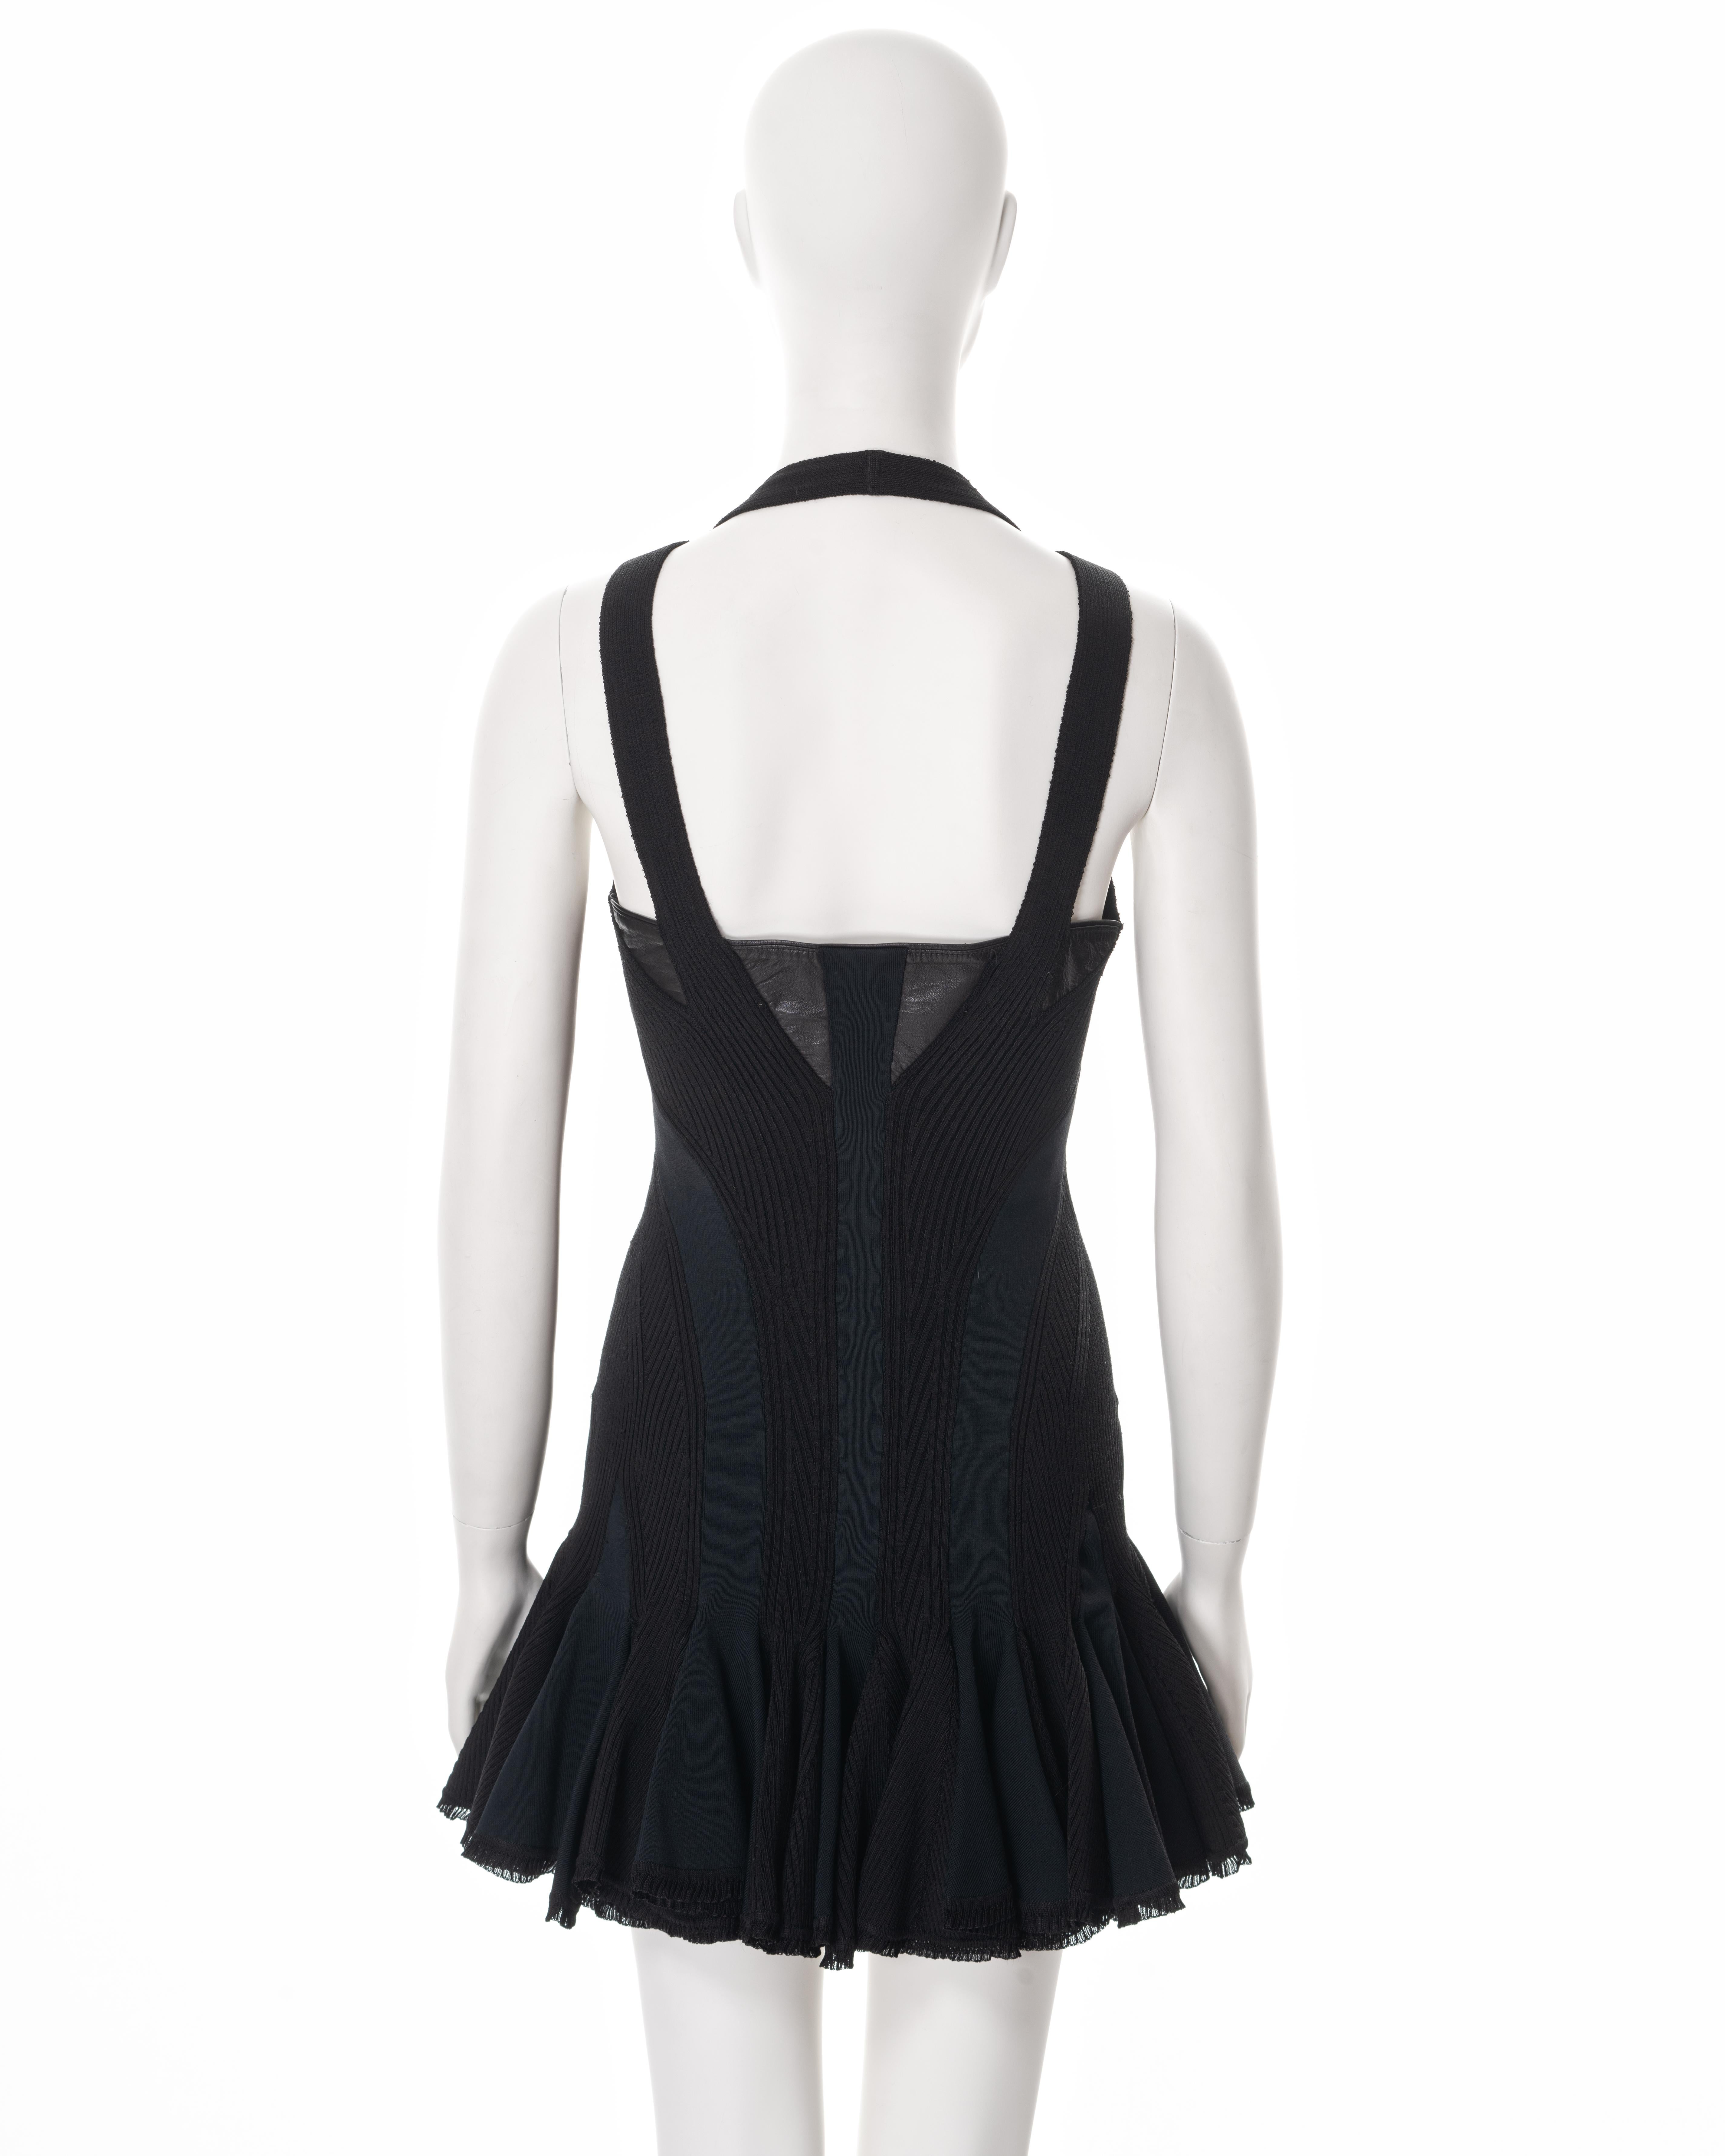 Alexander McQueen black rib knit mini dress with leather bustier, ss 2004 For Sale 4